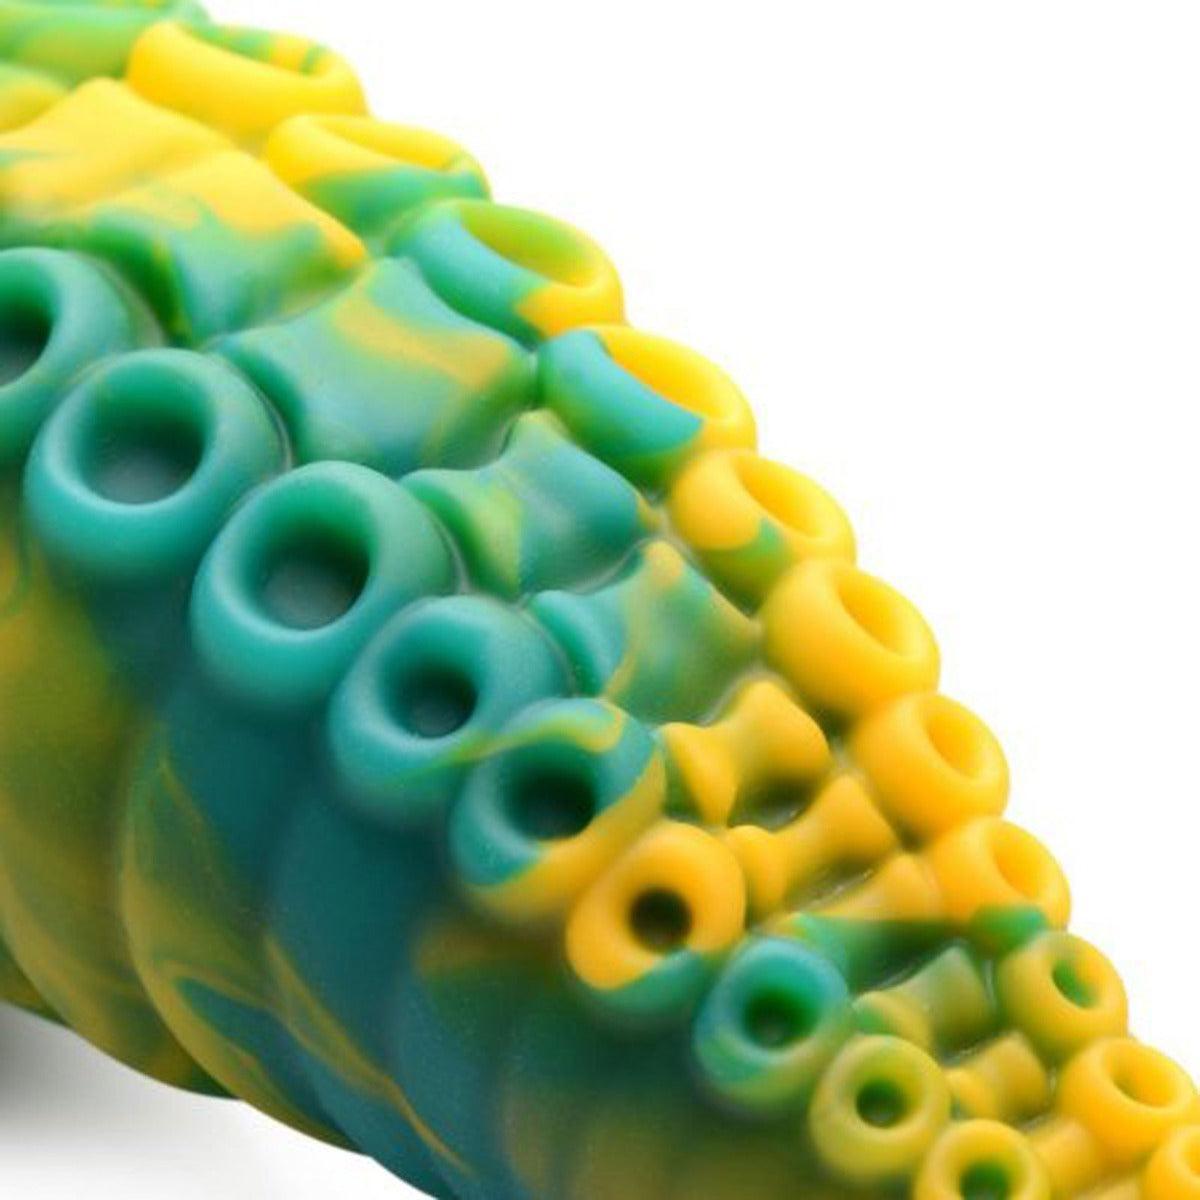 Creature Cocks Monstropus Tentacled Marble Green and Yellow Monster Silicone Dildo